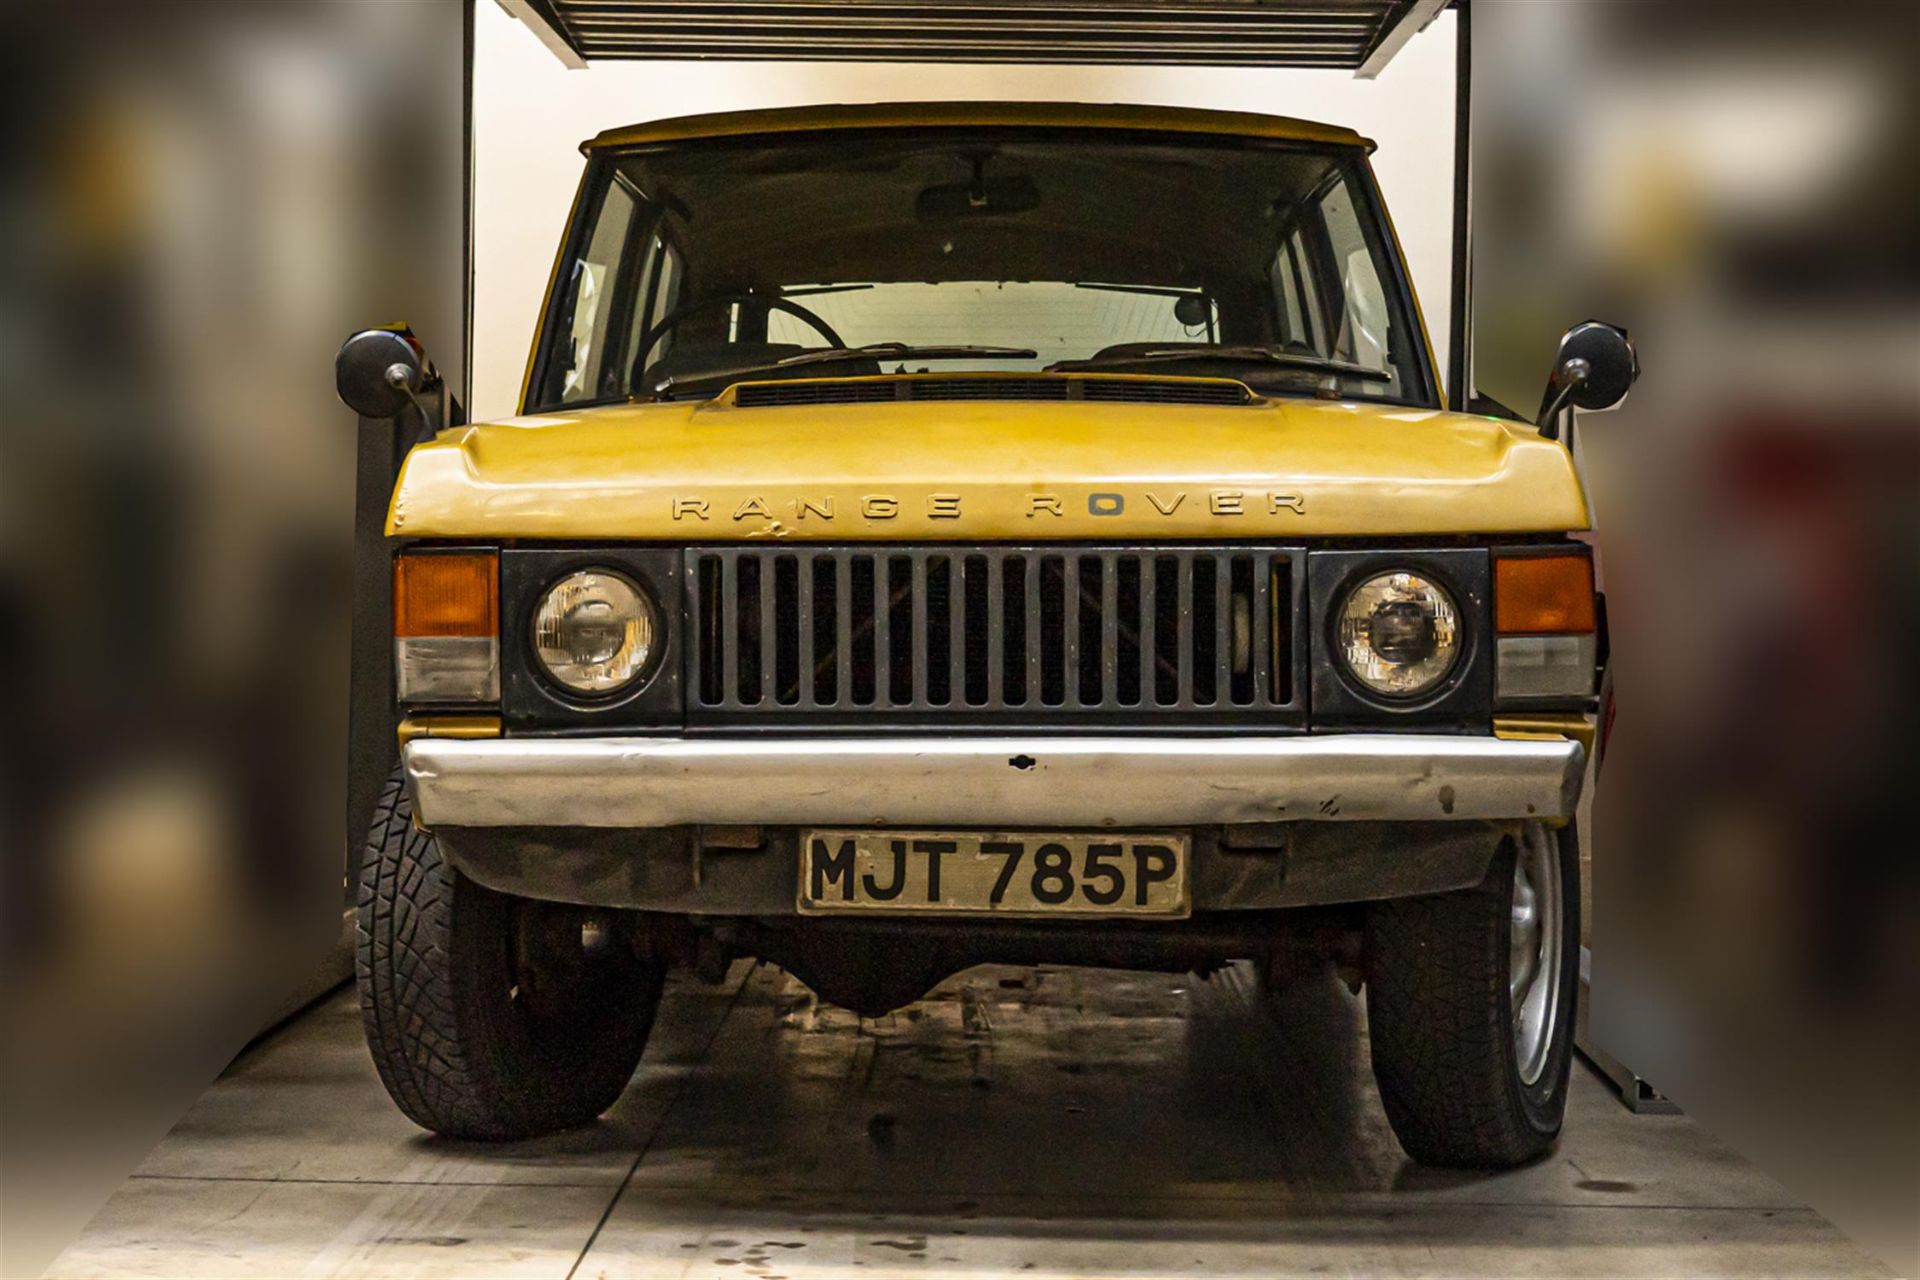 1972 Range Rover Classic 'Suffix A' - Image 2 of 5